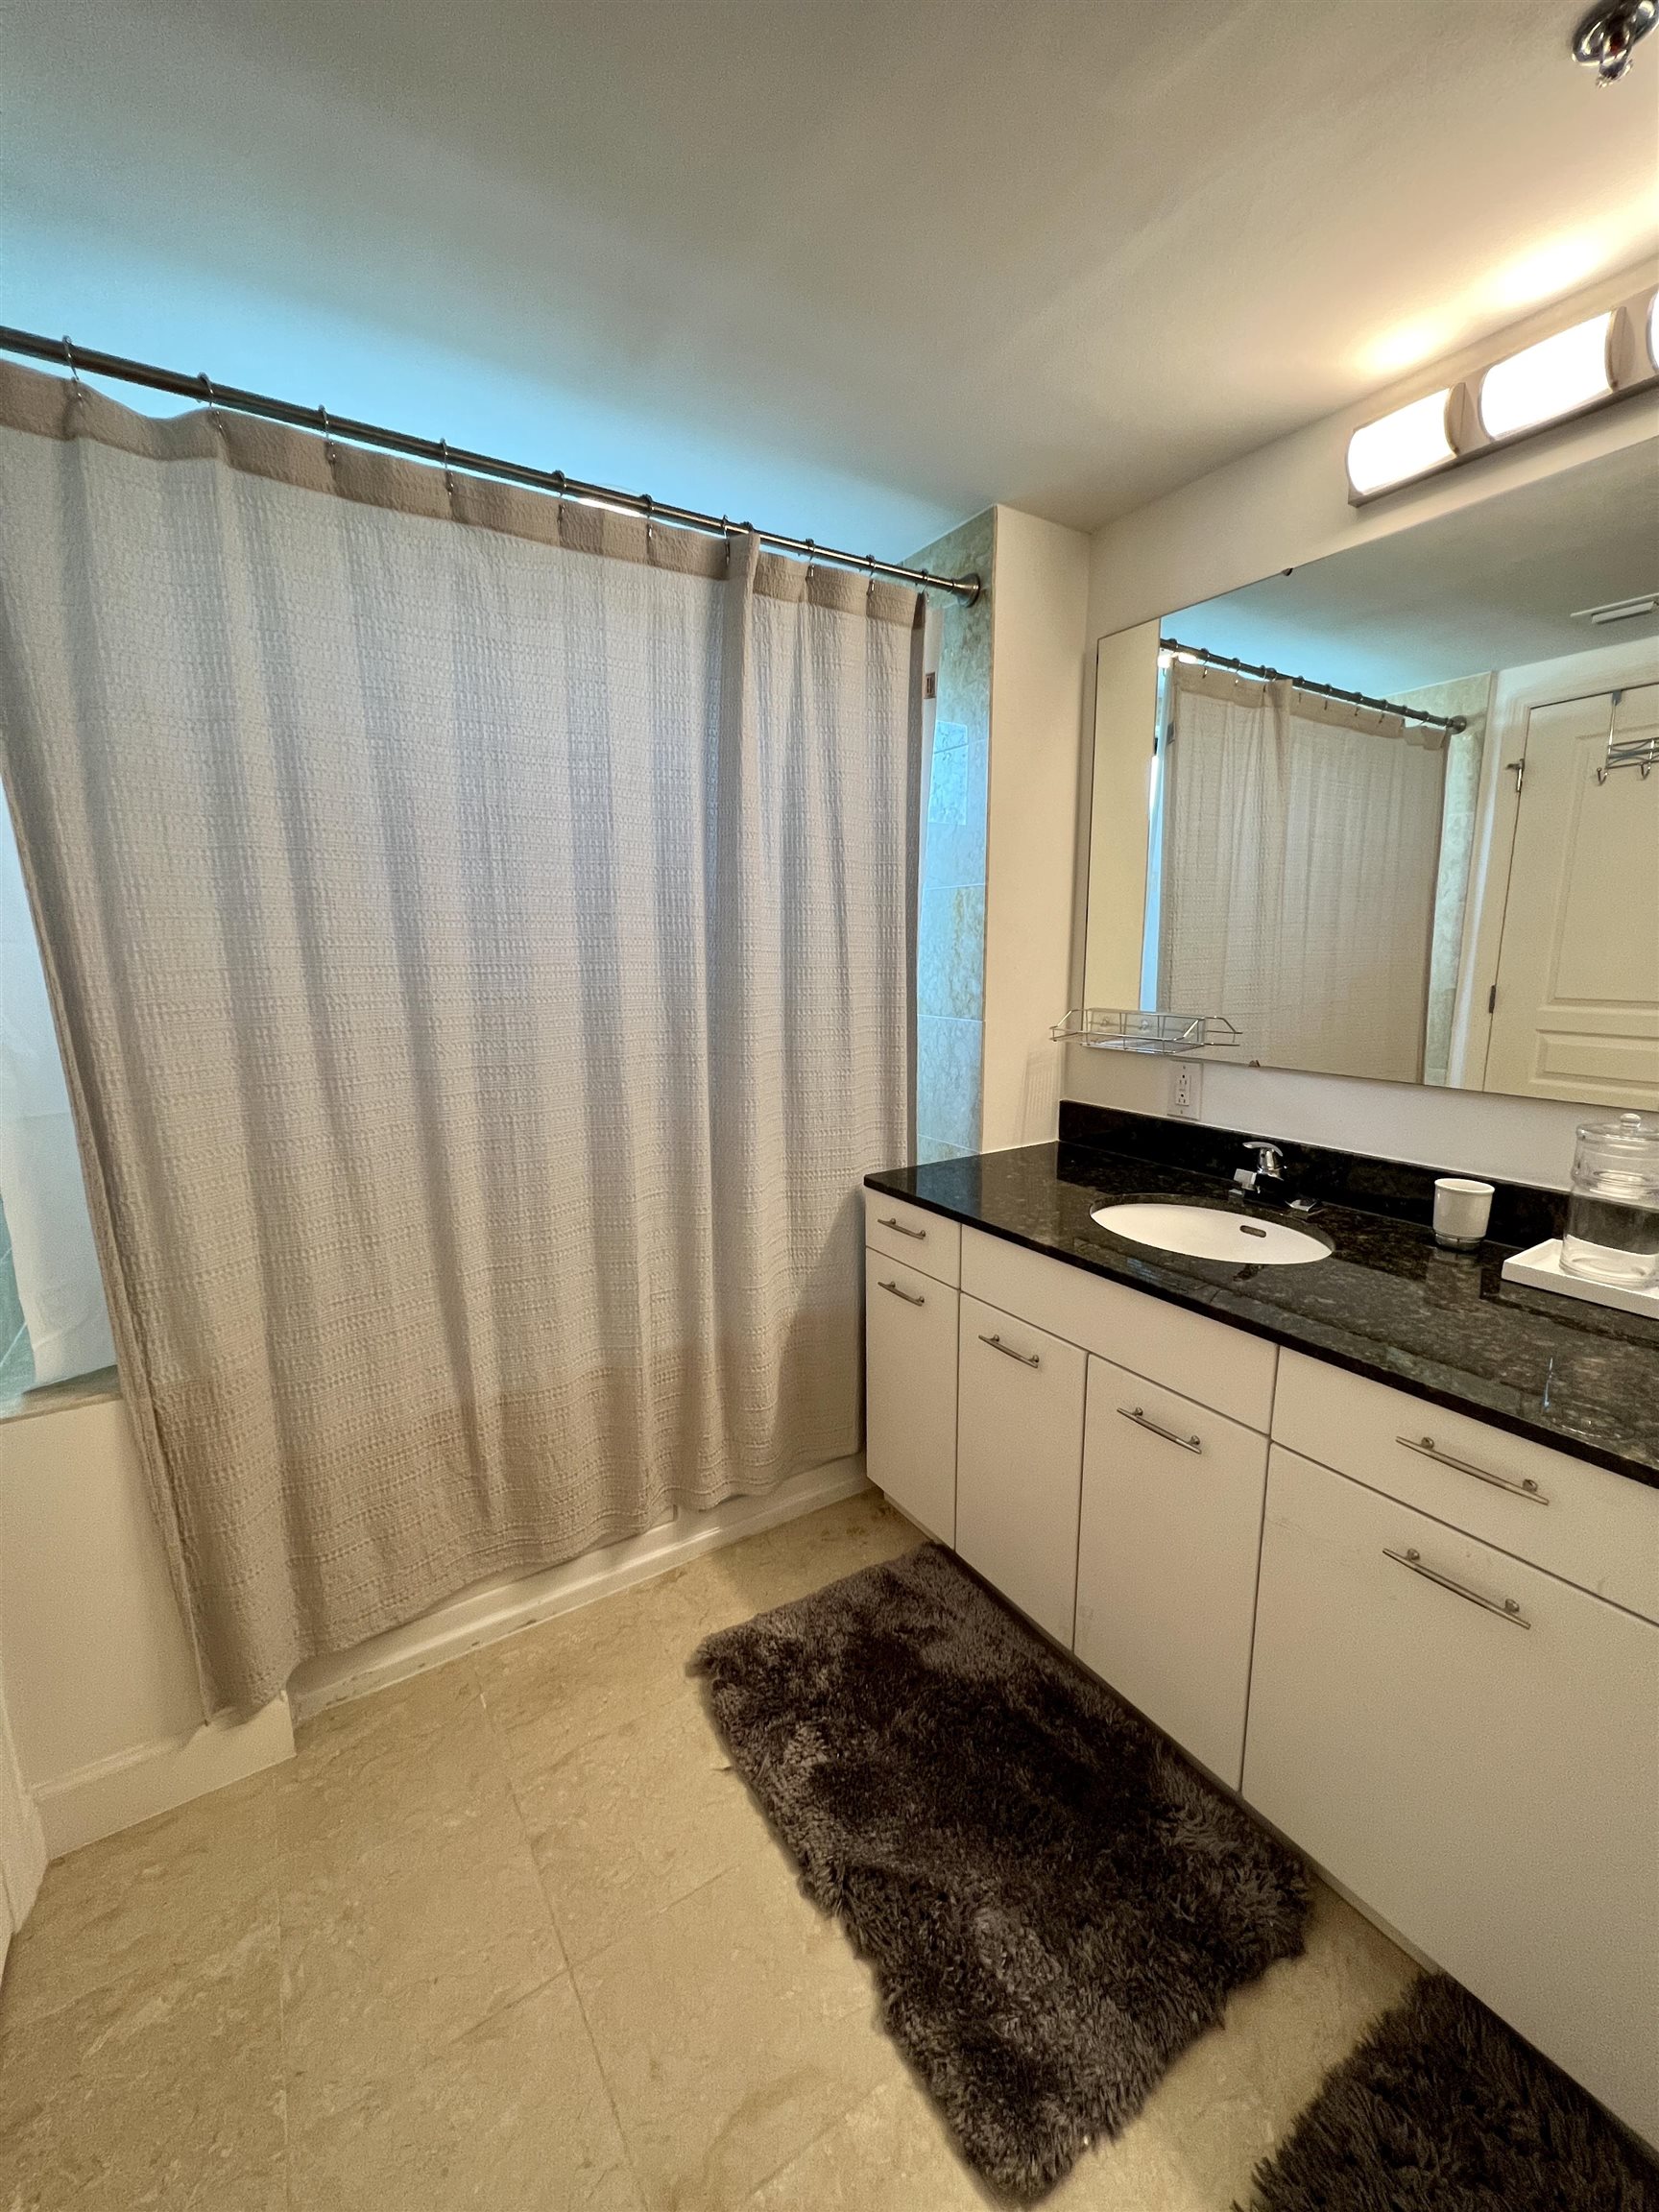 300 S Duval Street,TALLAHASSEE,Florida 32301,2 Bedrooms Bedrooms,2 BathroomsBathrooms,Condo,300 S Duval Street,369116